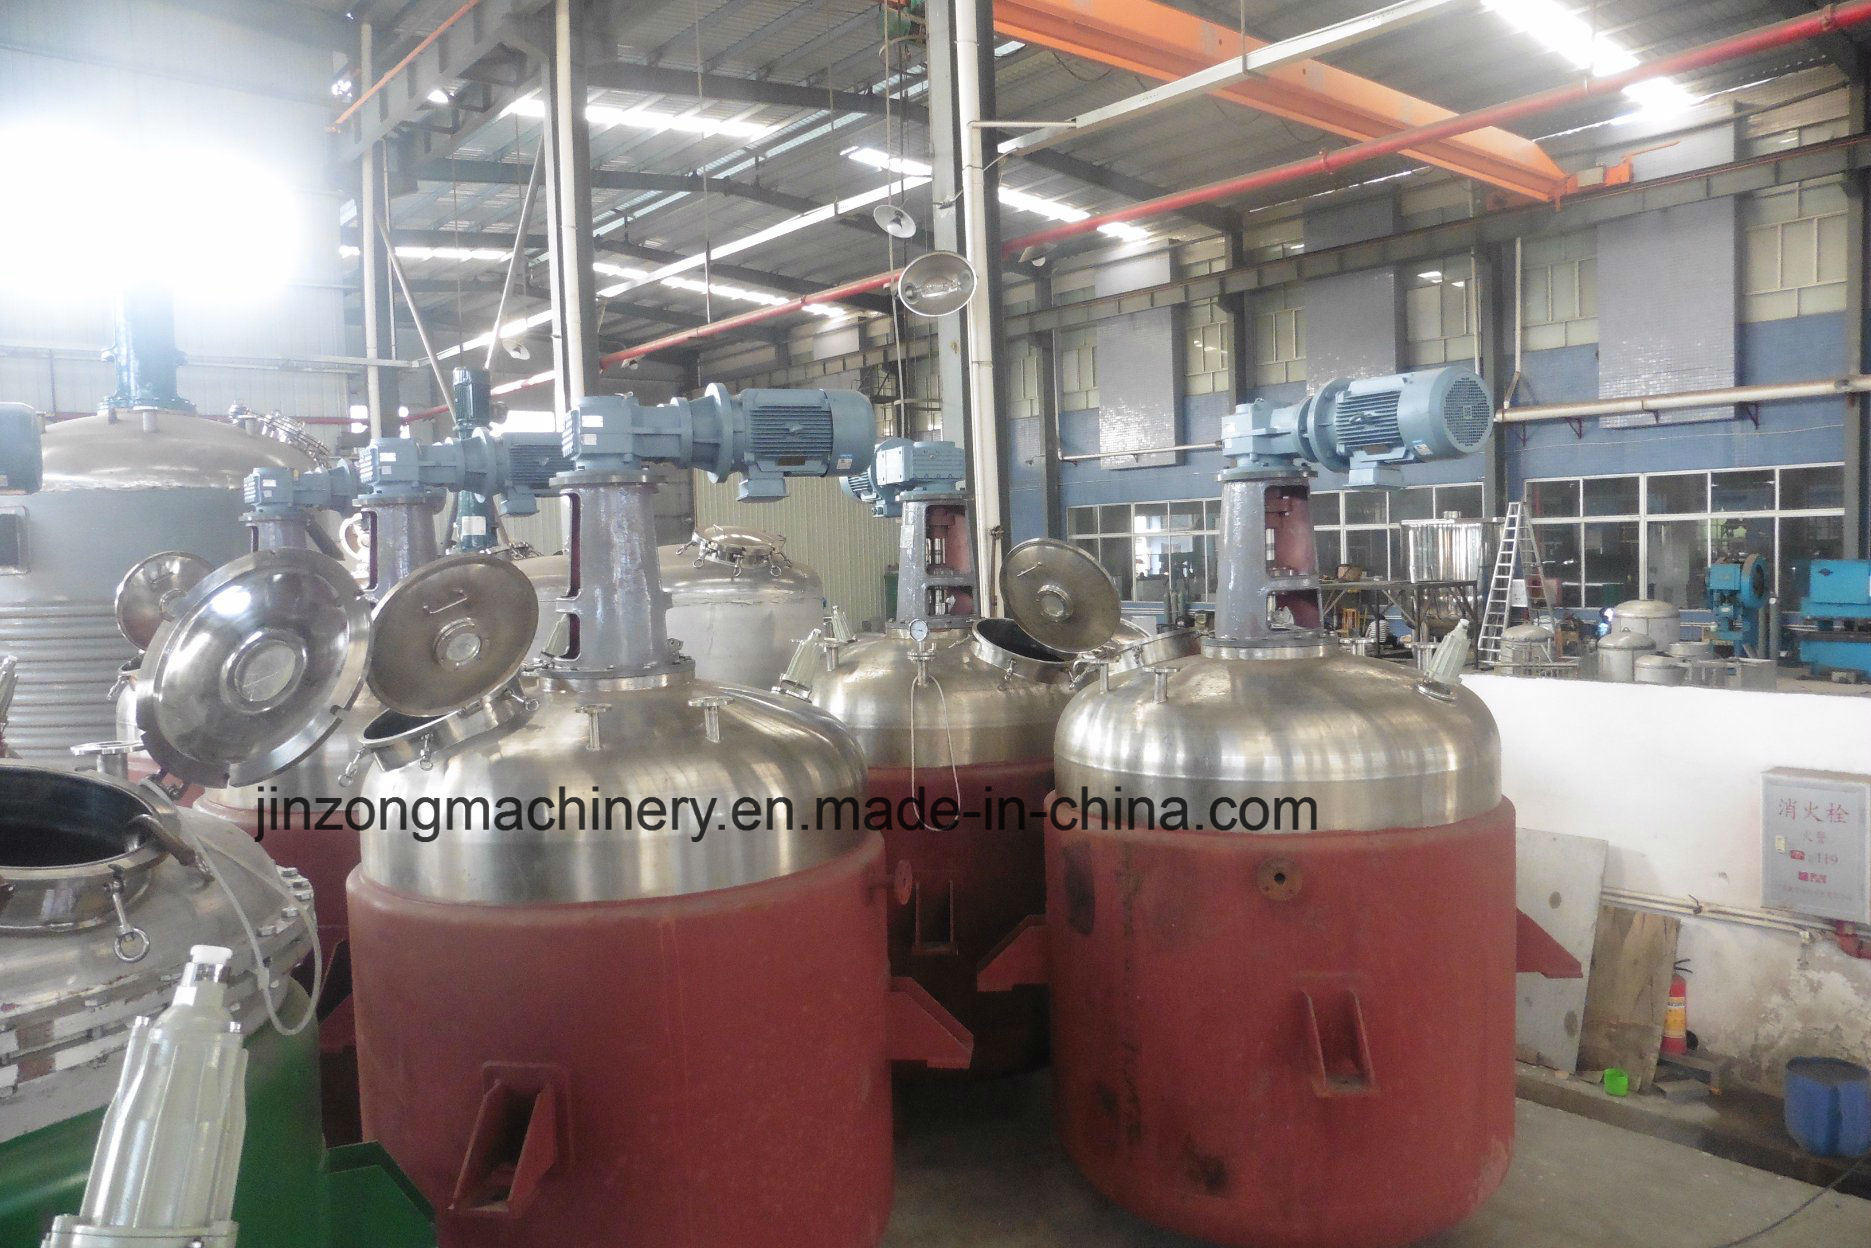 Stainless Steel Jacketed Reactor for Chemial Industry